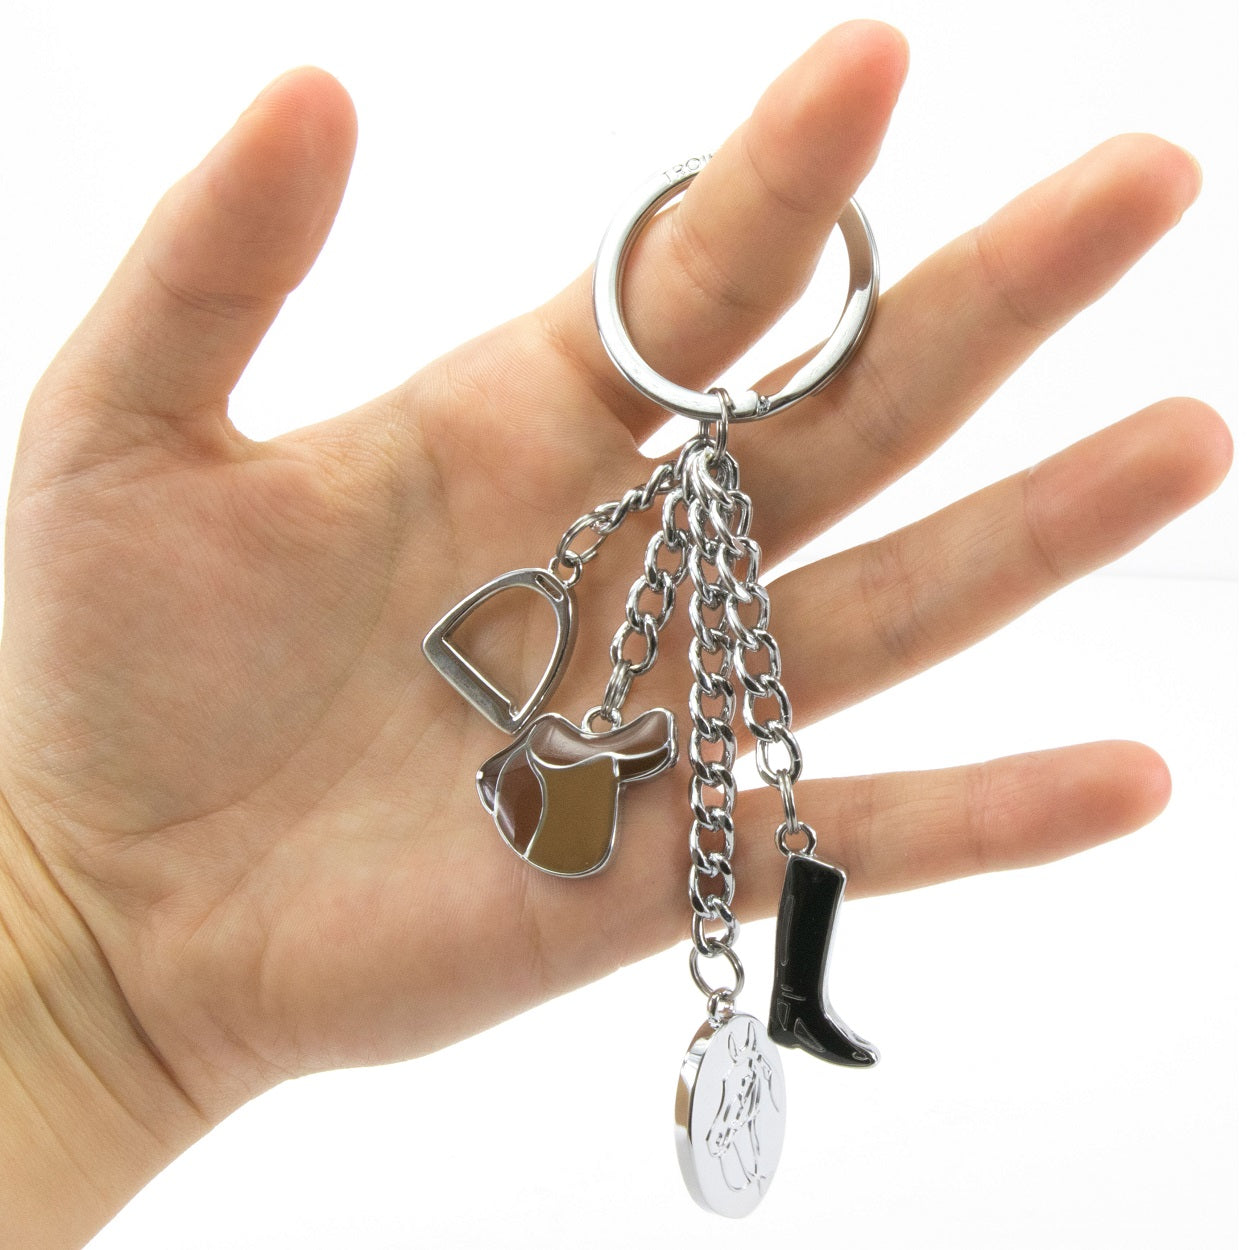 TROIKA Keyring with 4 Charms LUCKY HORSE PFERDEGLUCK